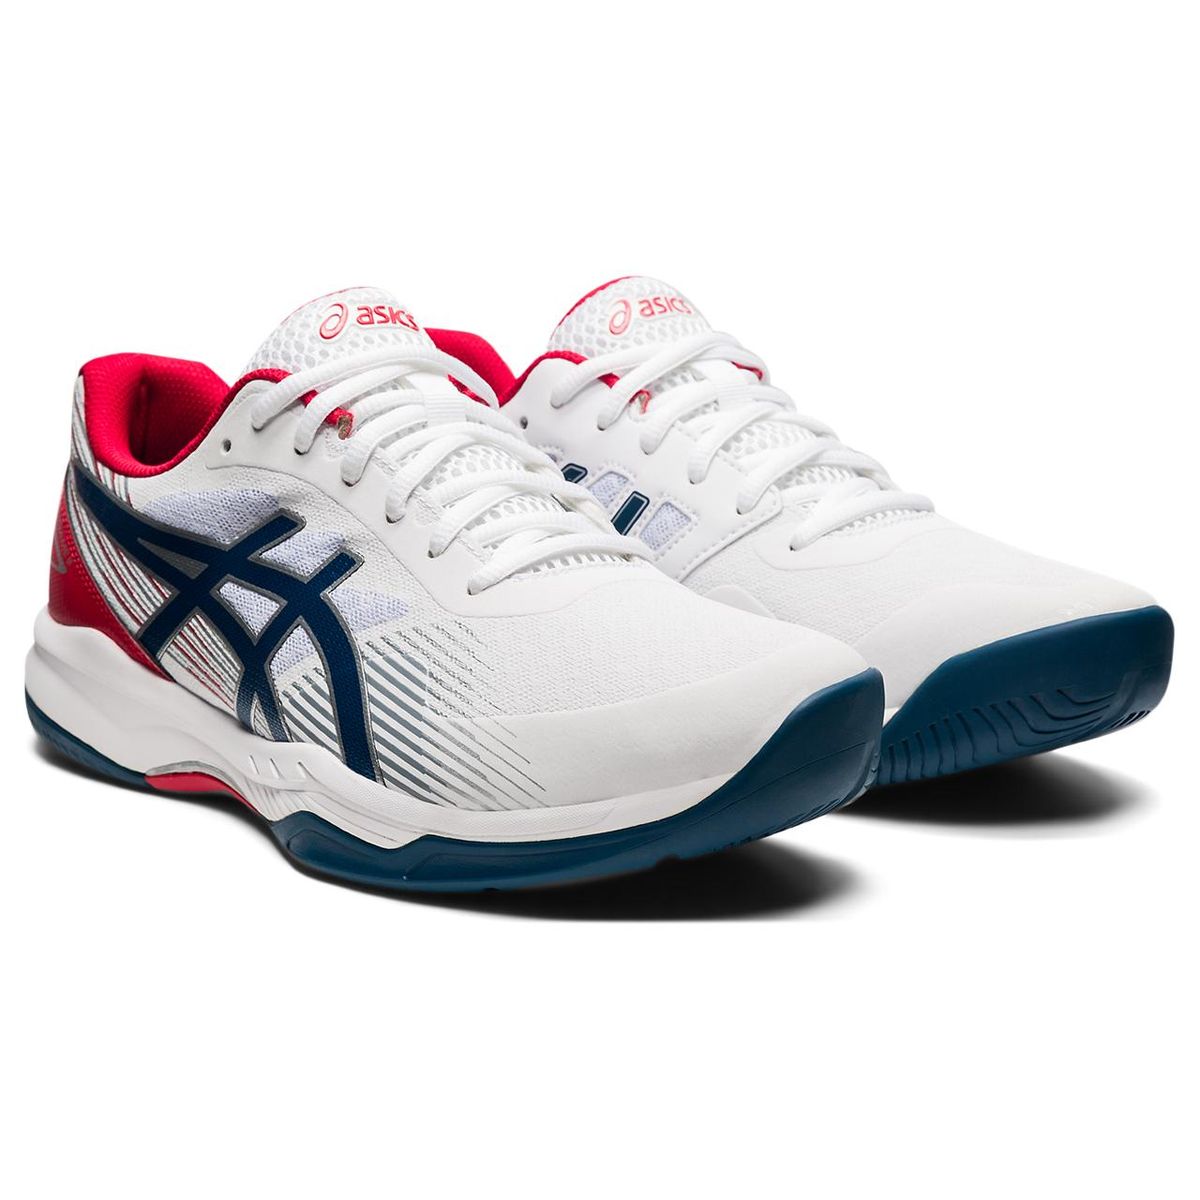 Asics Men's Gel-Game 8 Tennis Shoes - White | Buy Online in South Africa |  